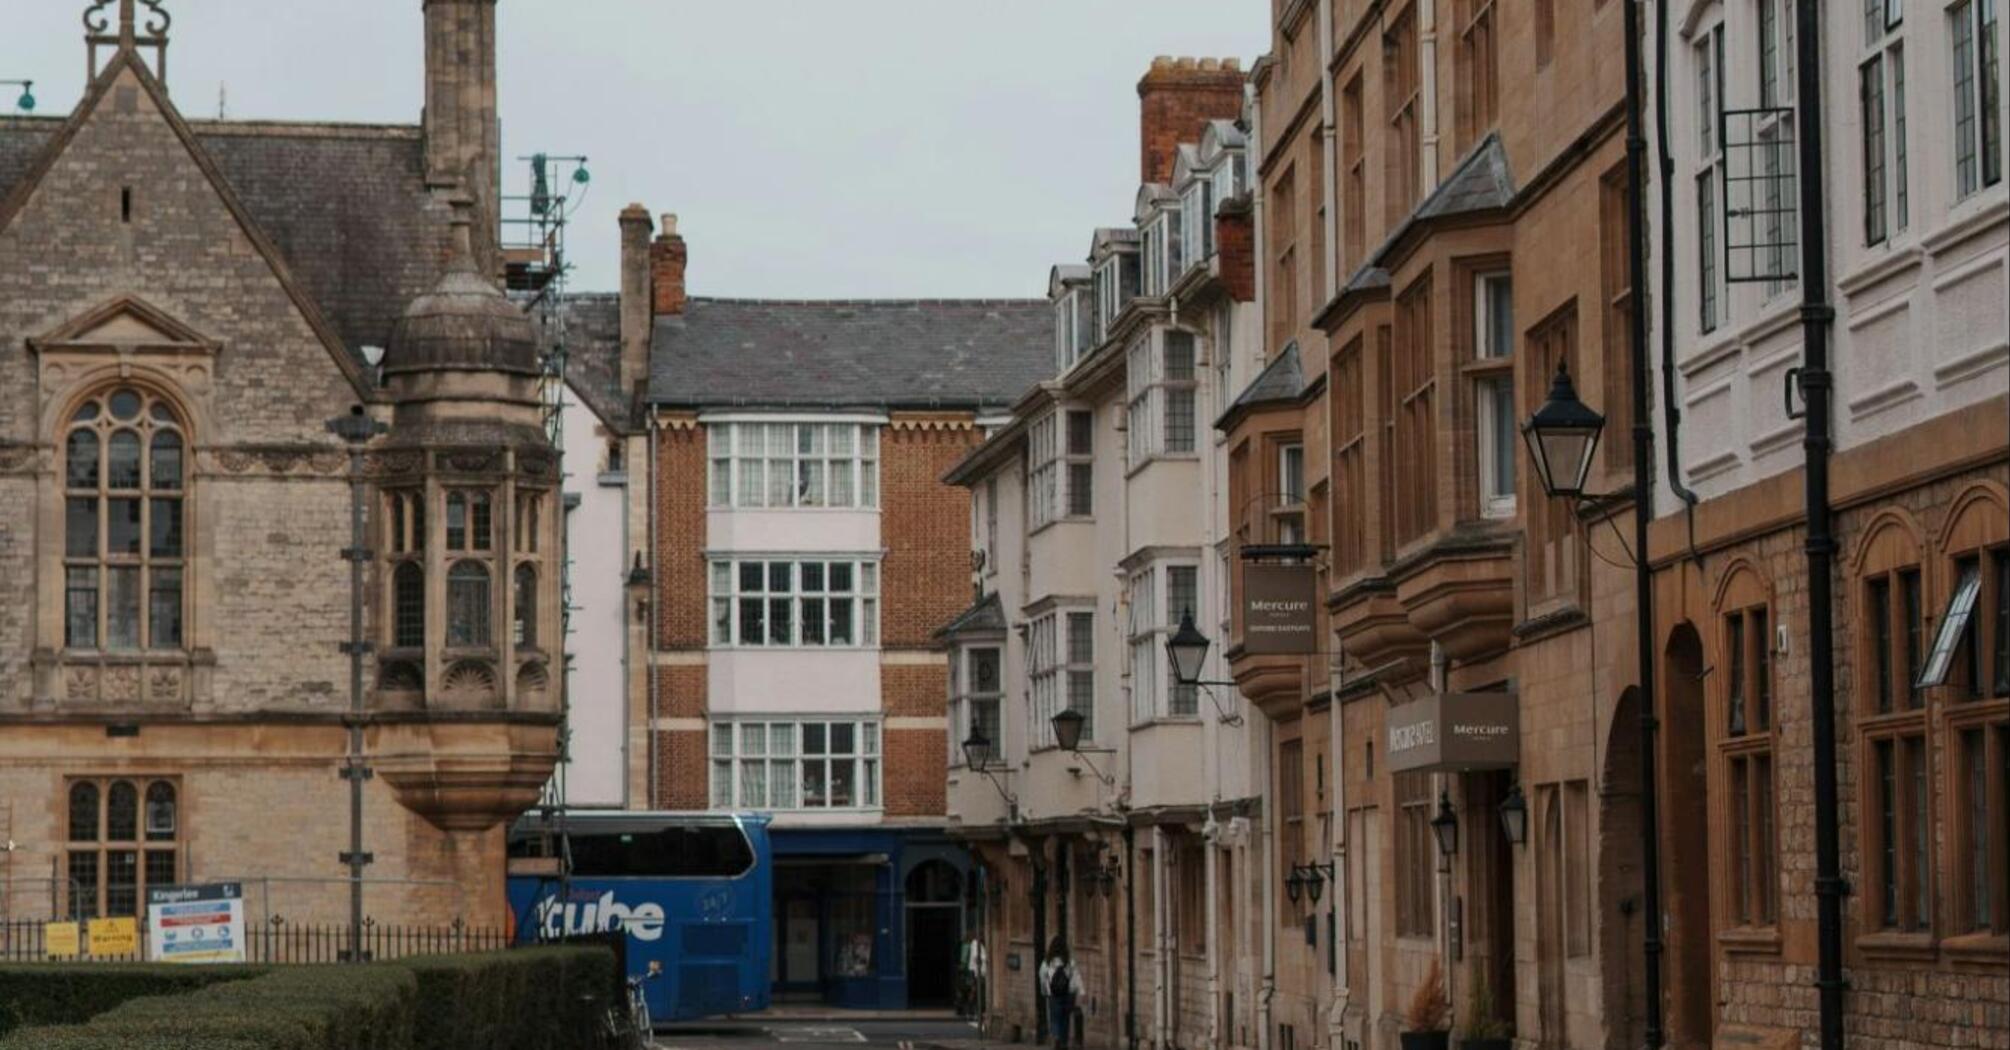 A quiet street with a blue bus in the background